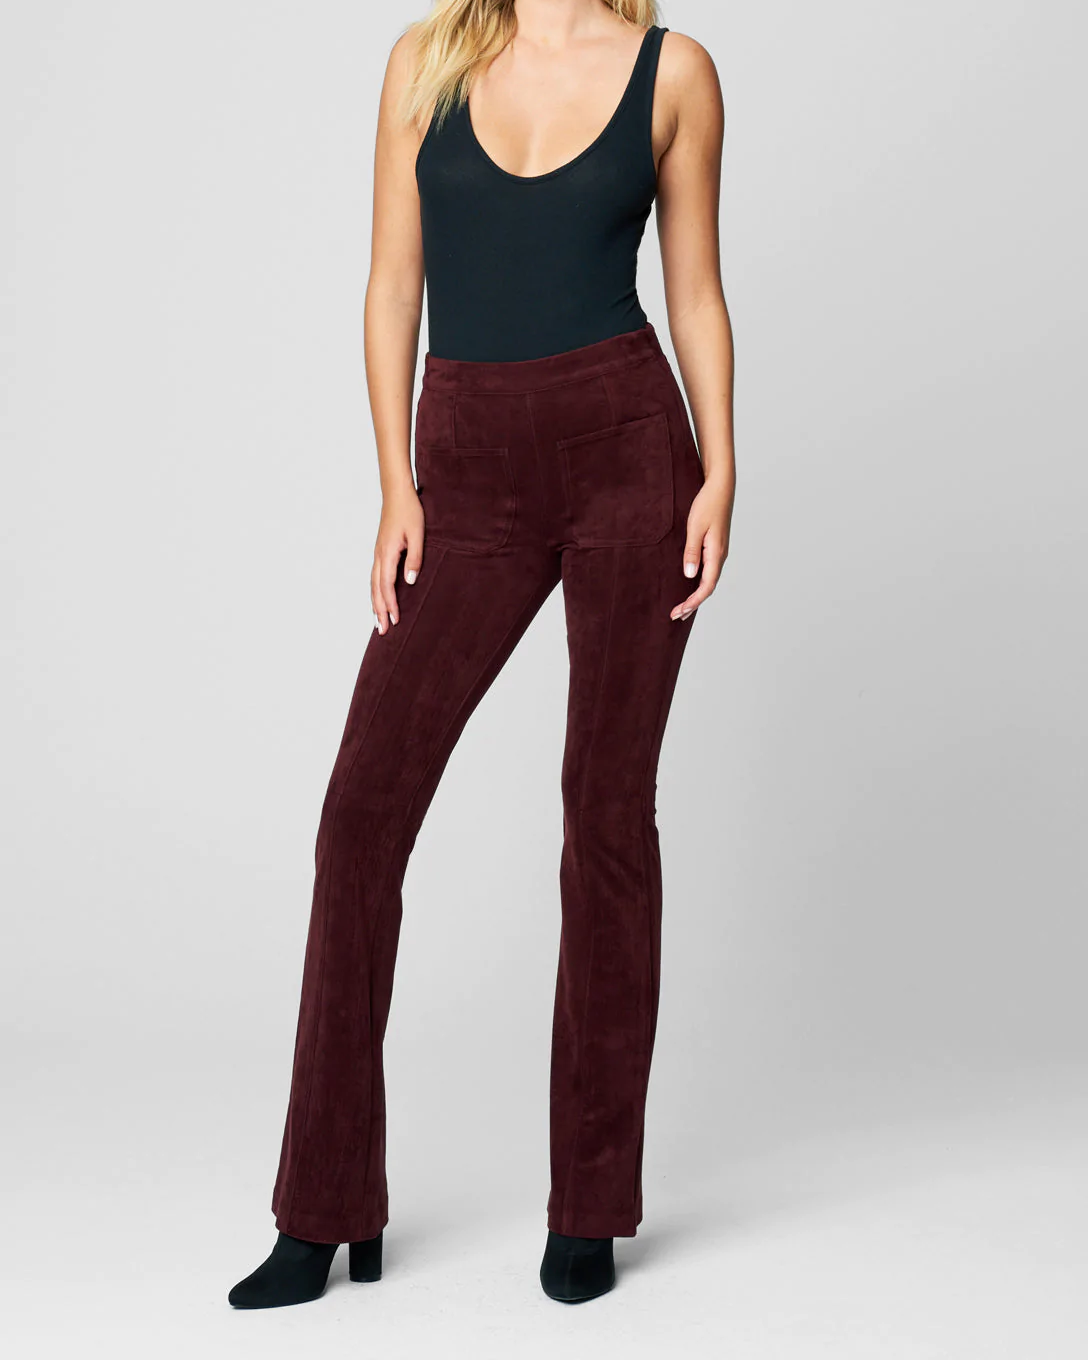 BREEZY BEAUTY SUEDE PANTS l FLYING TOMATO | Flying Tomato